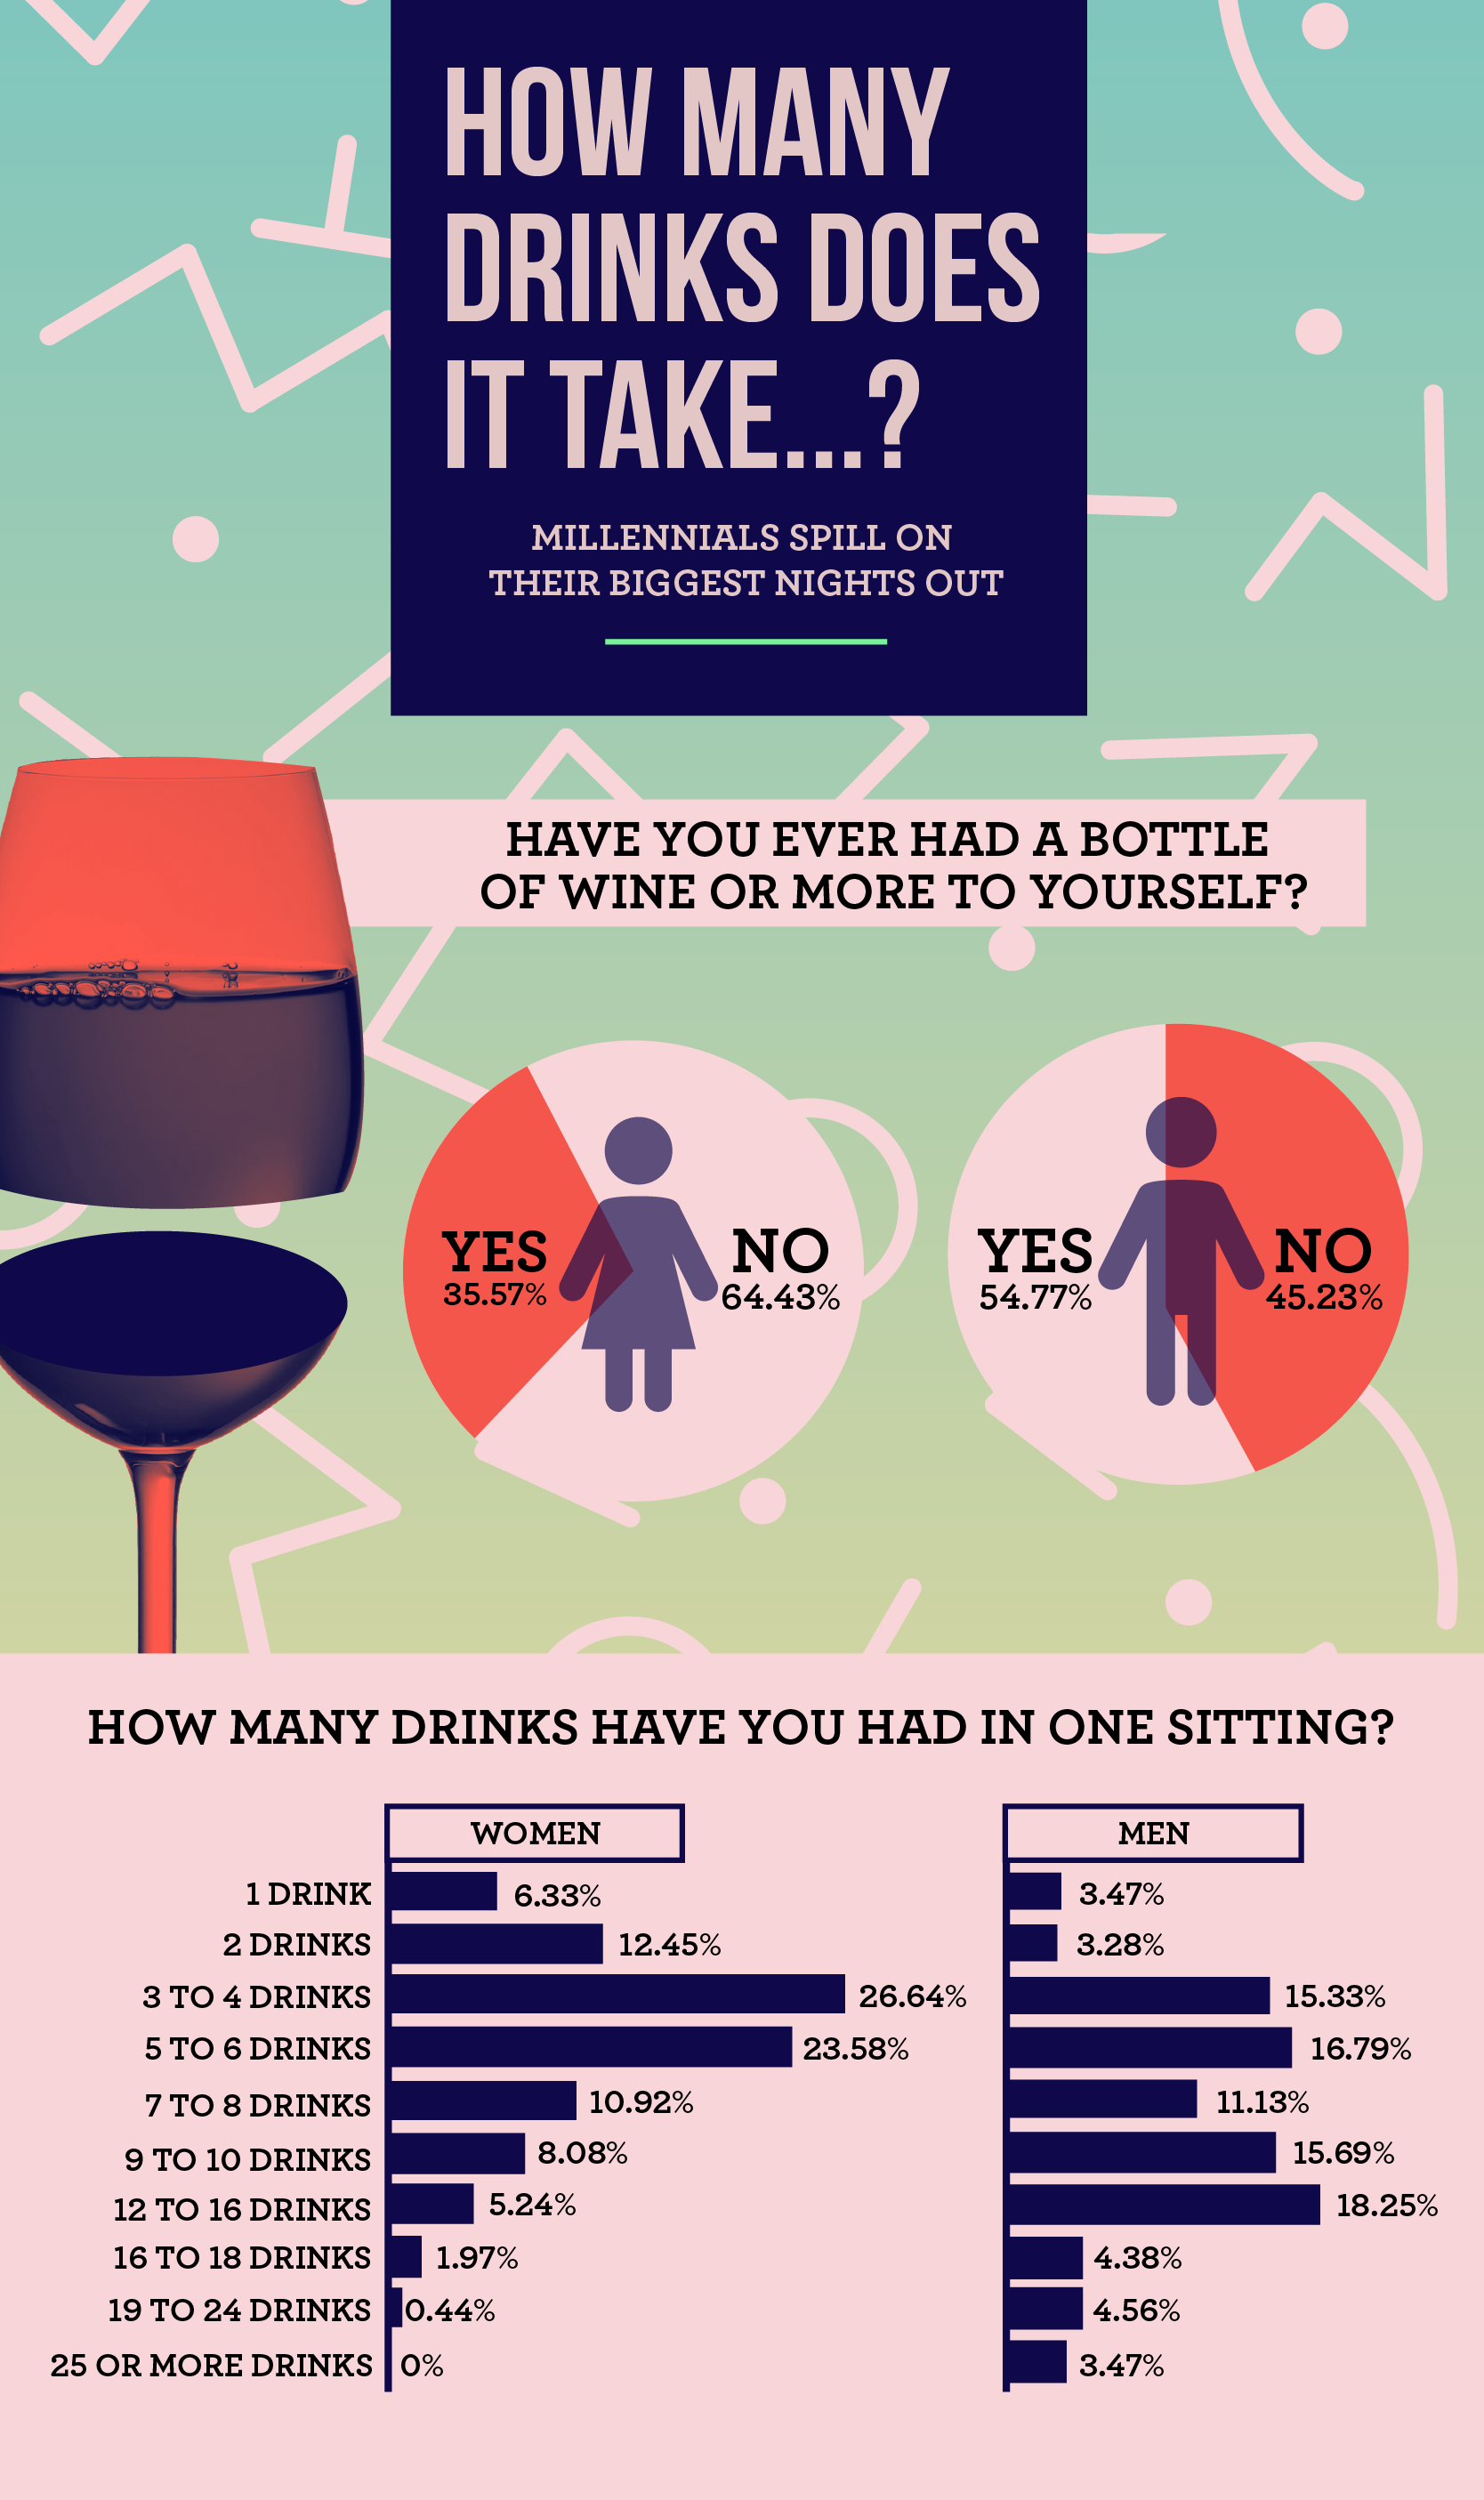 how many drinks does it take?